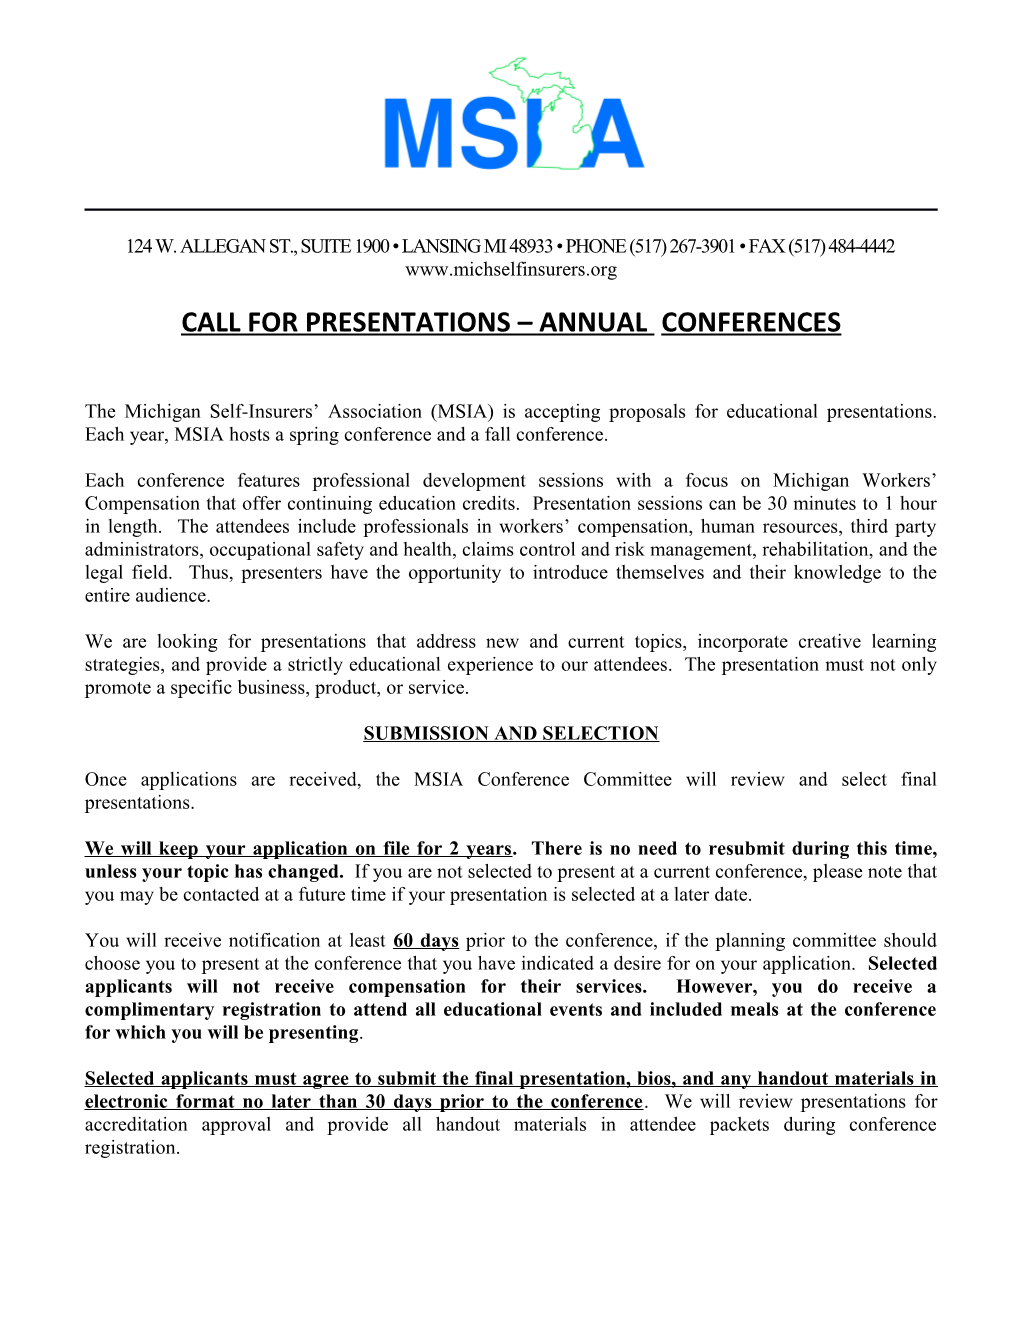 Call for Presentations Annual Conferences